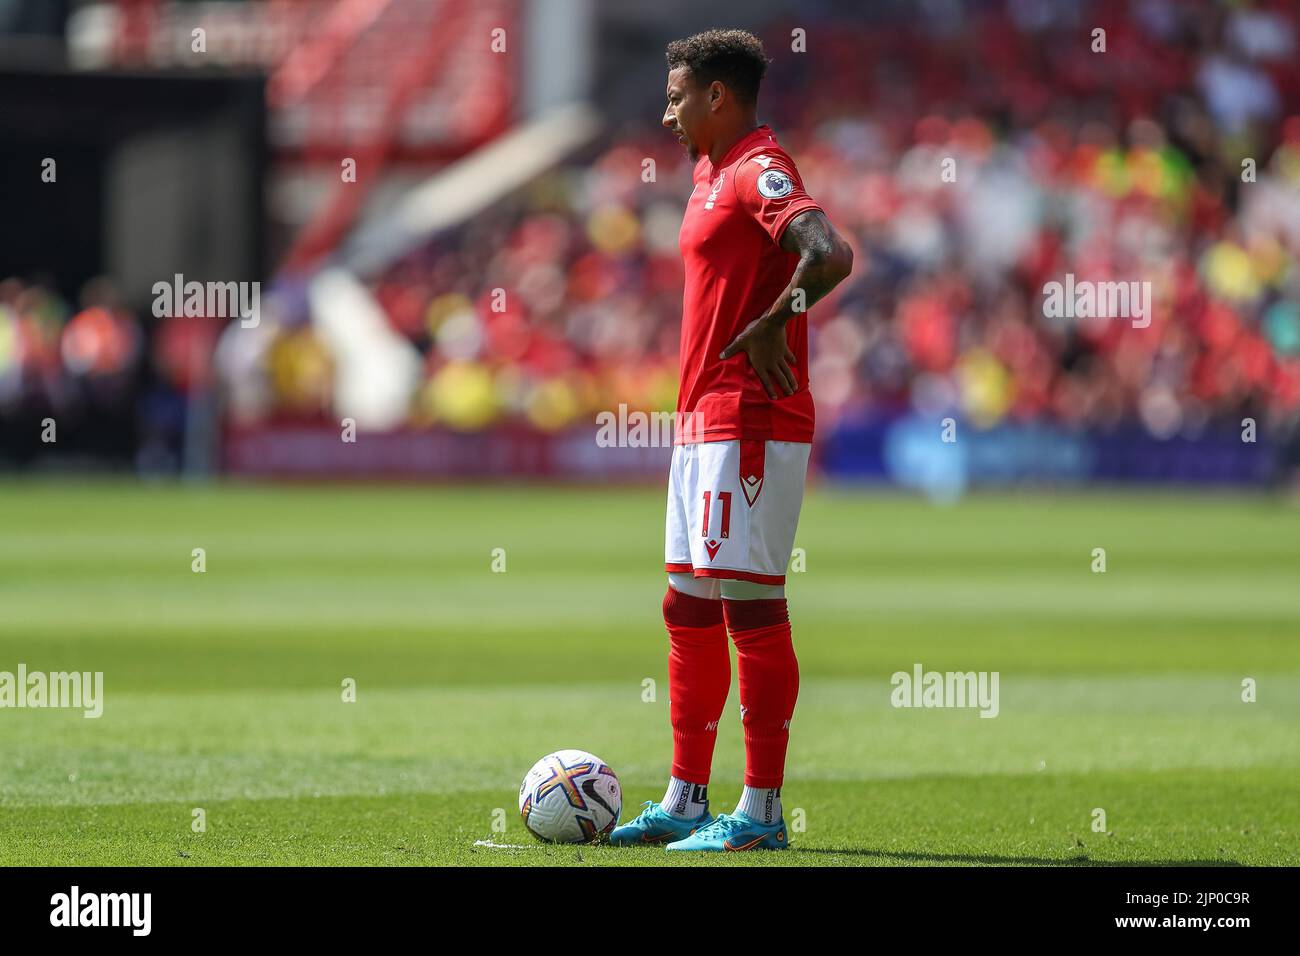 Jesse Lingard #11 of Nottingham Forest stands over a free kick Stock Photo